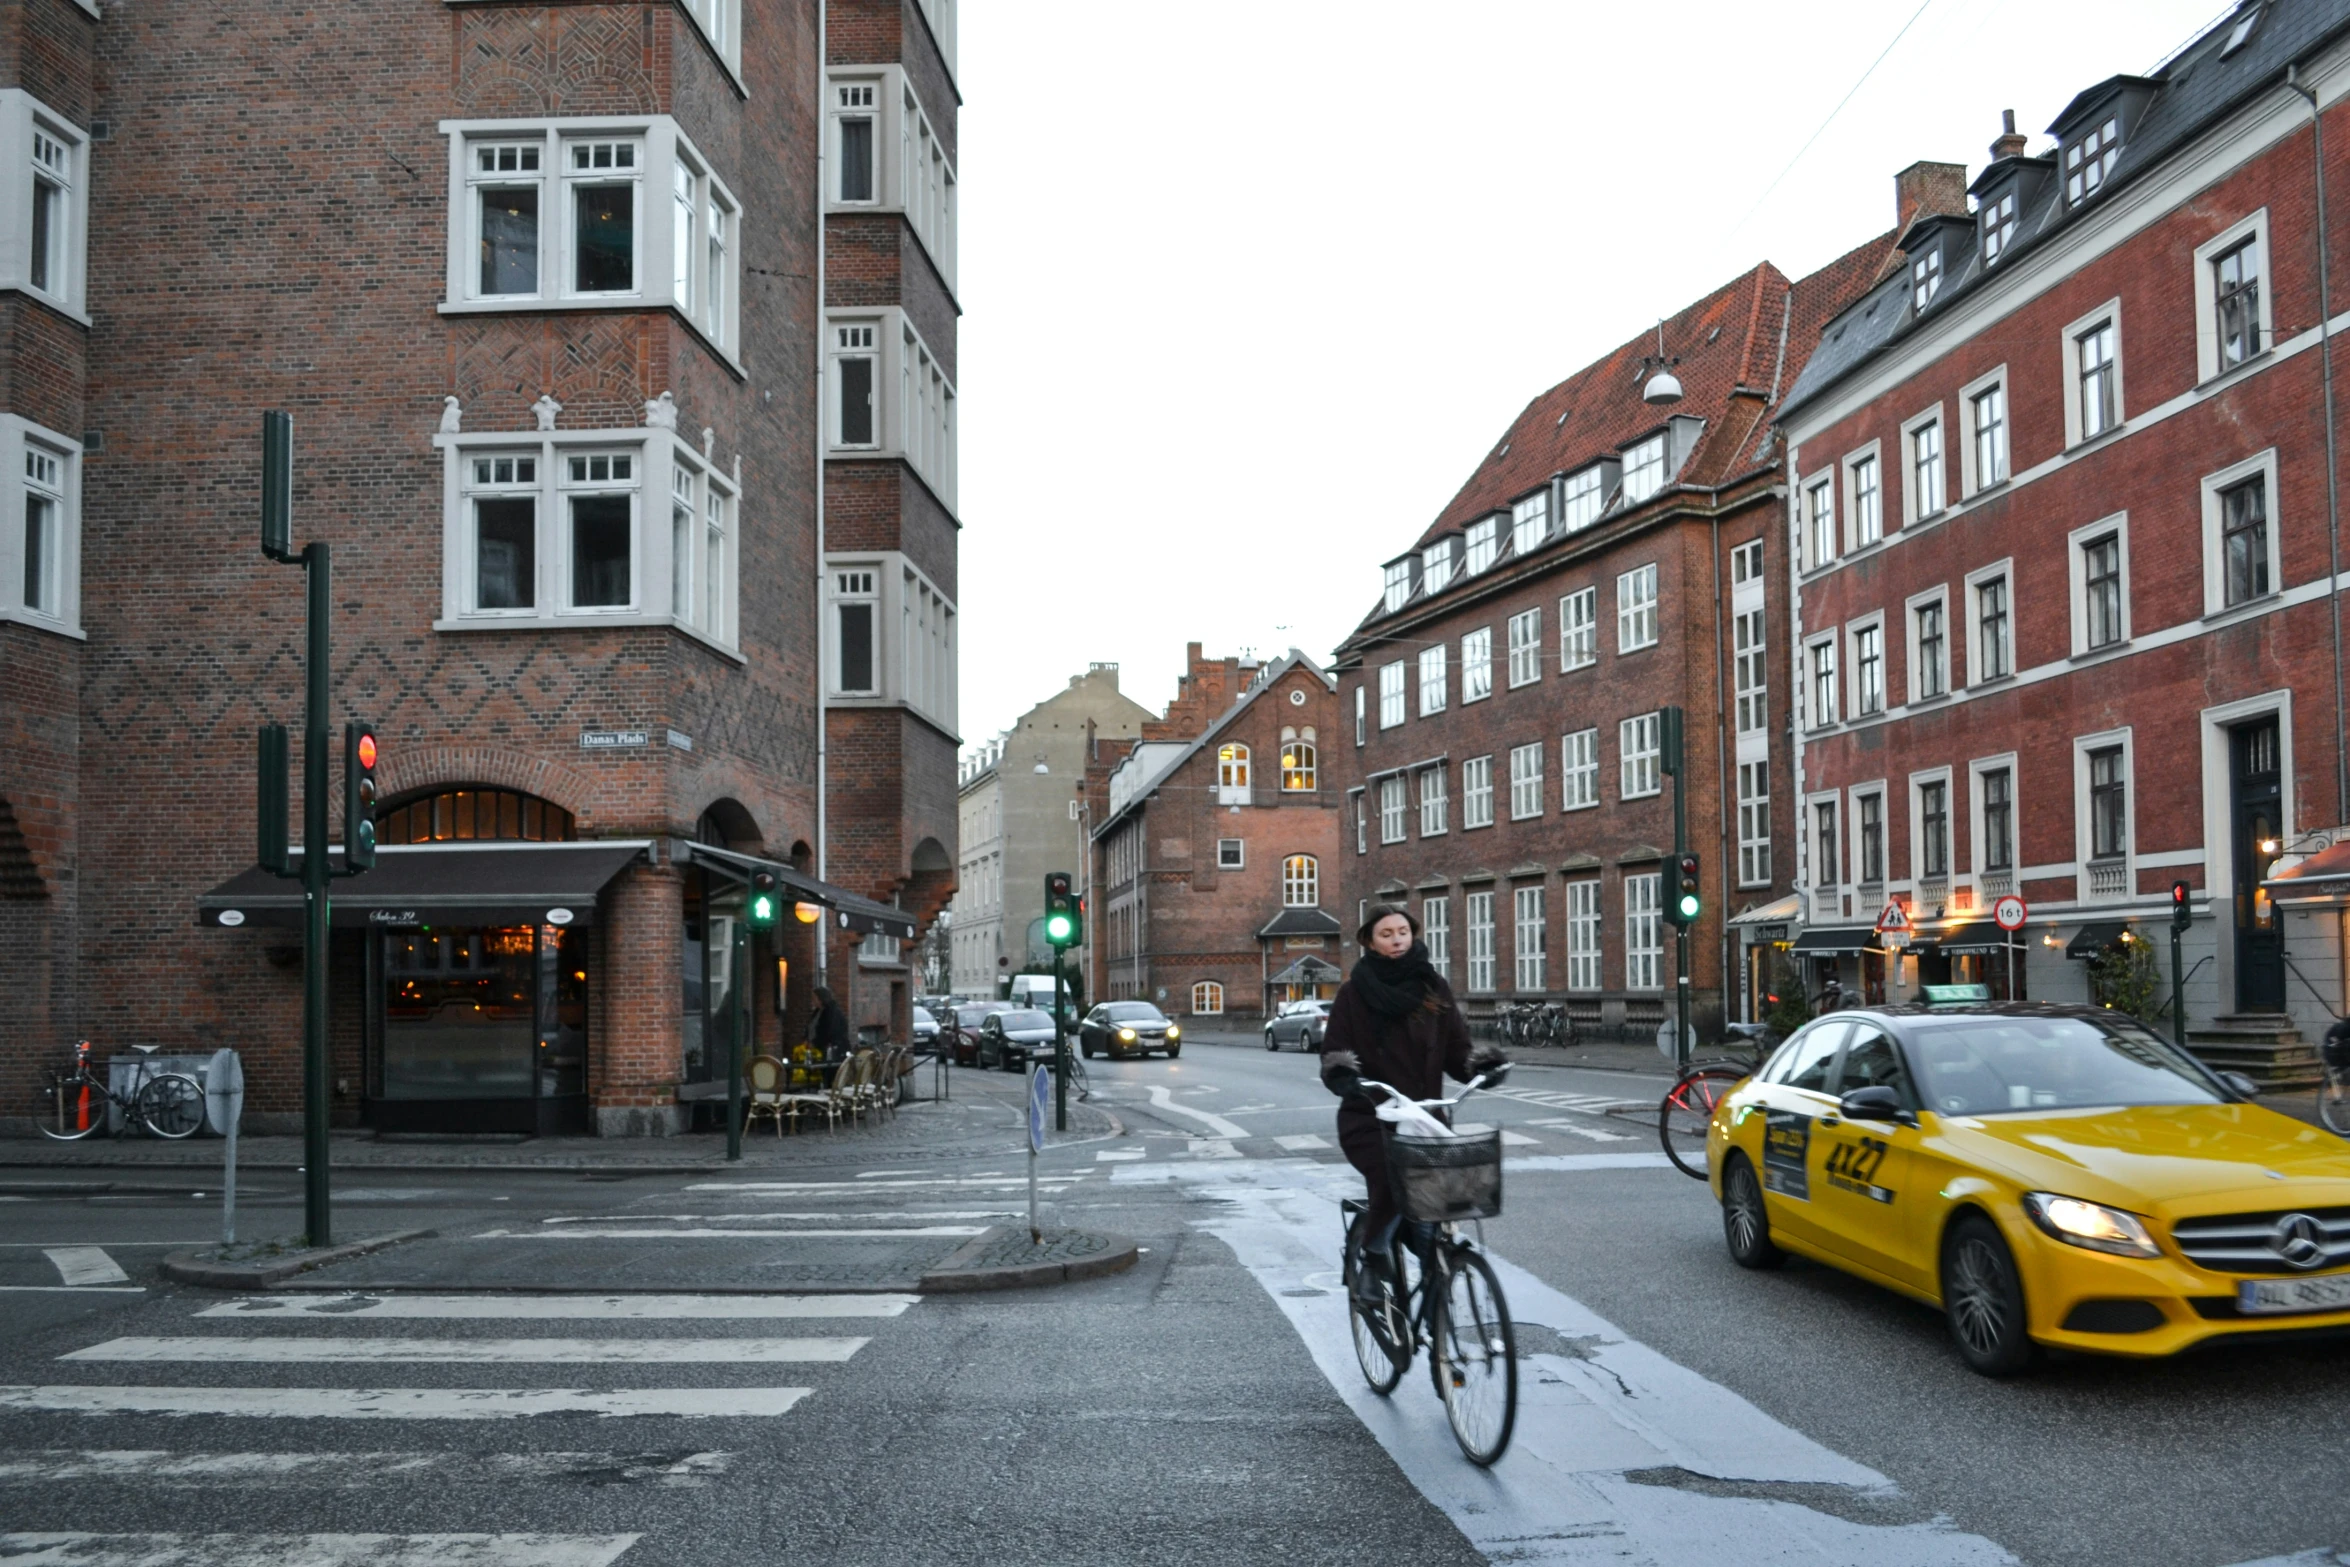 the man is riding his bicycle through a quiet street